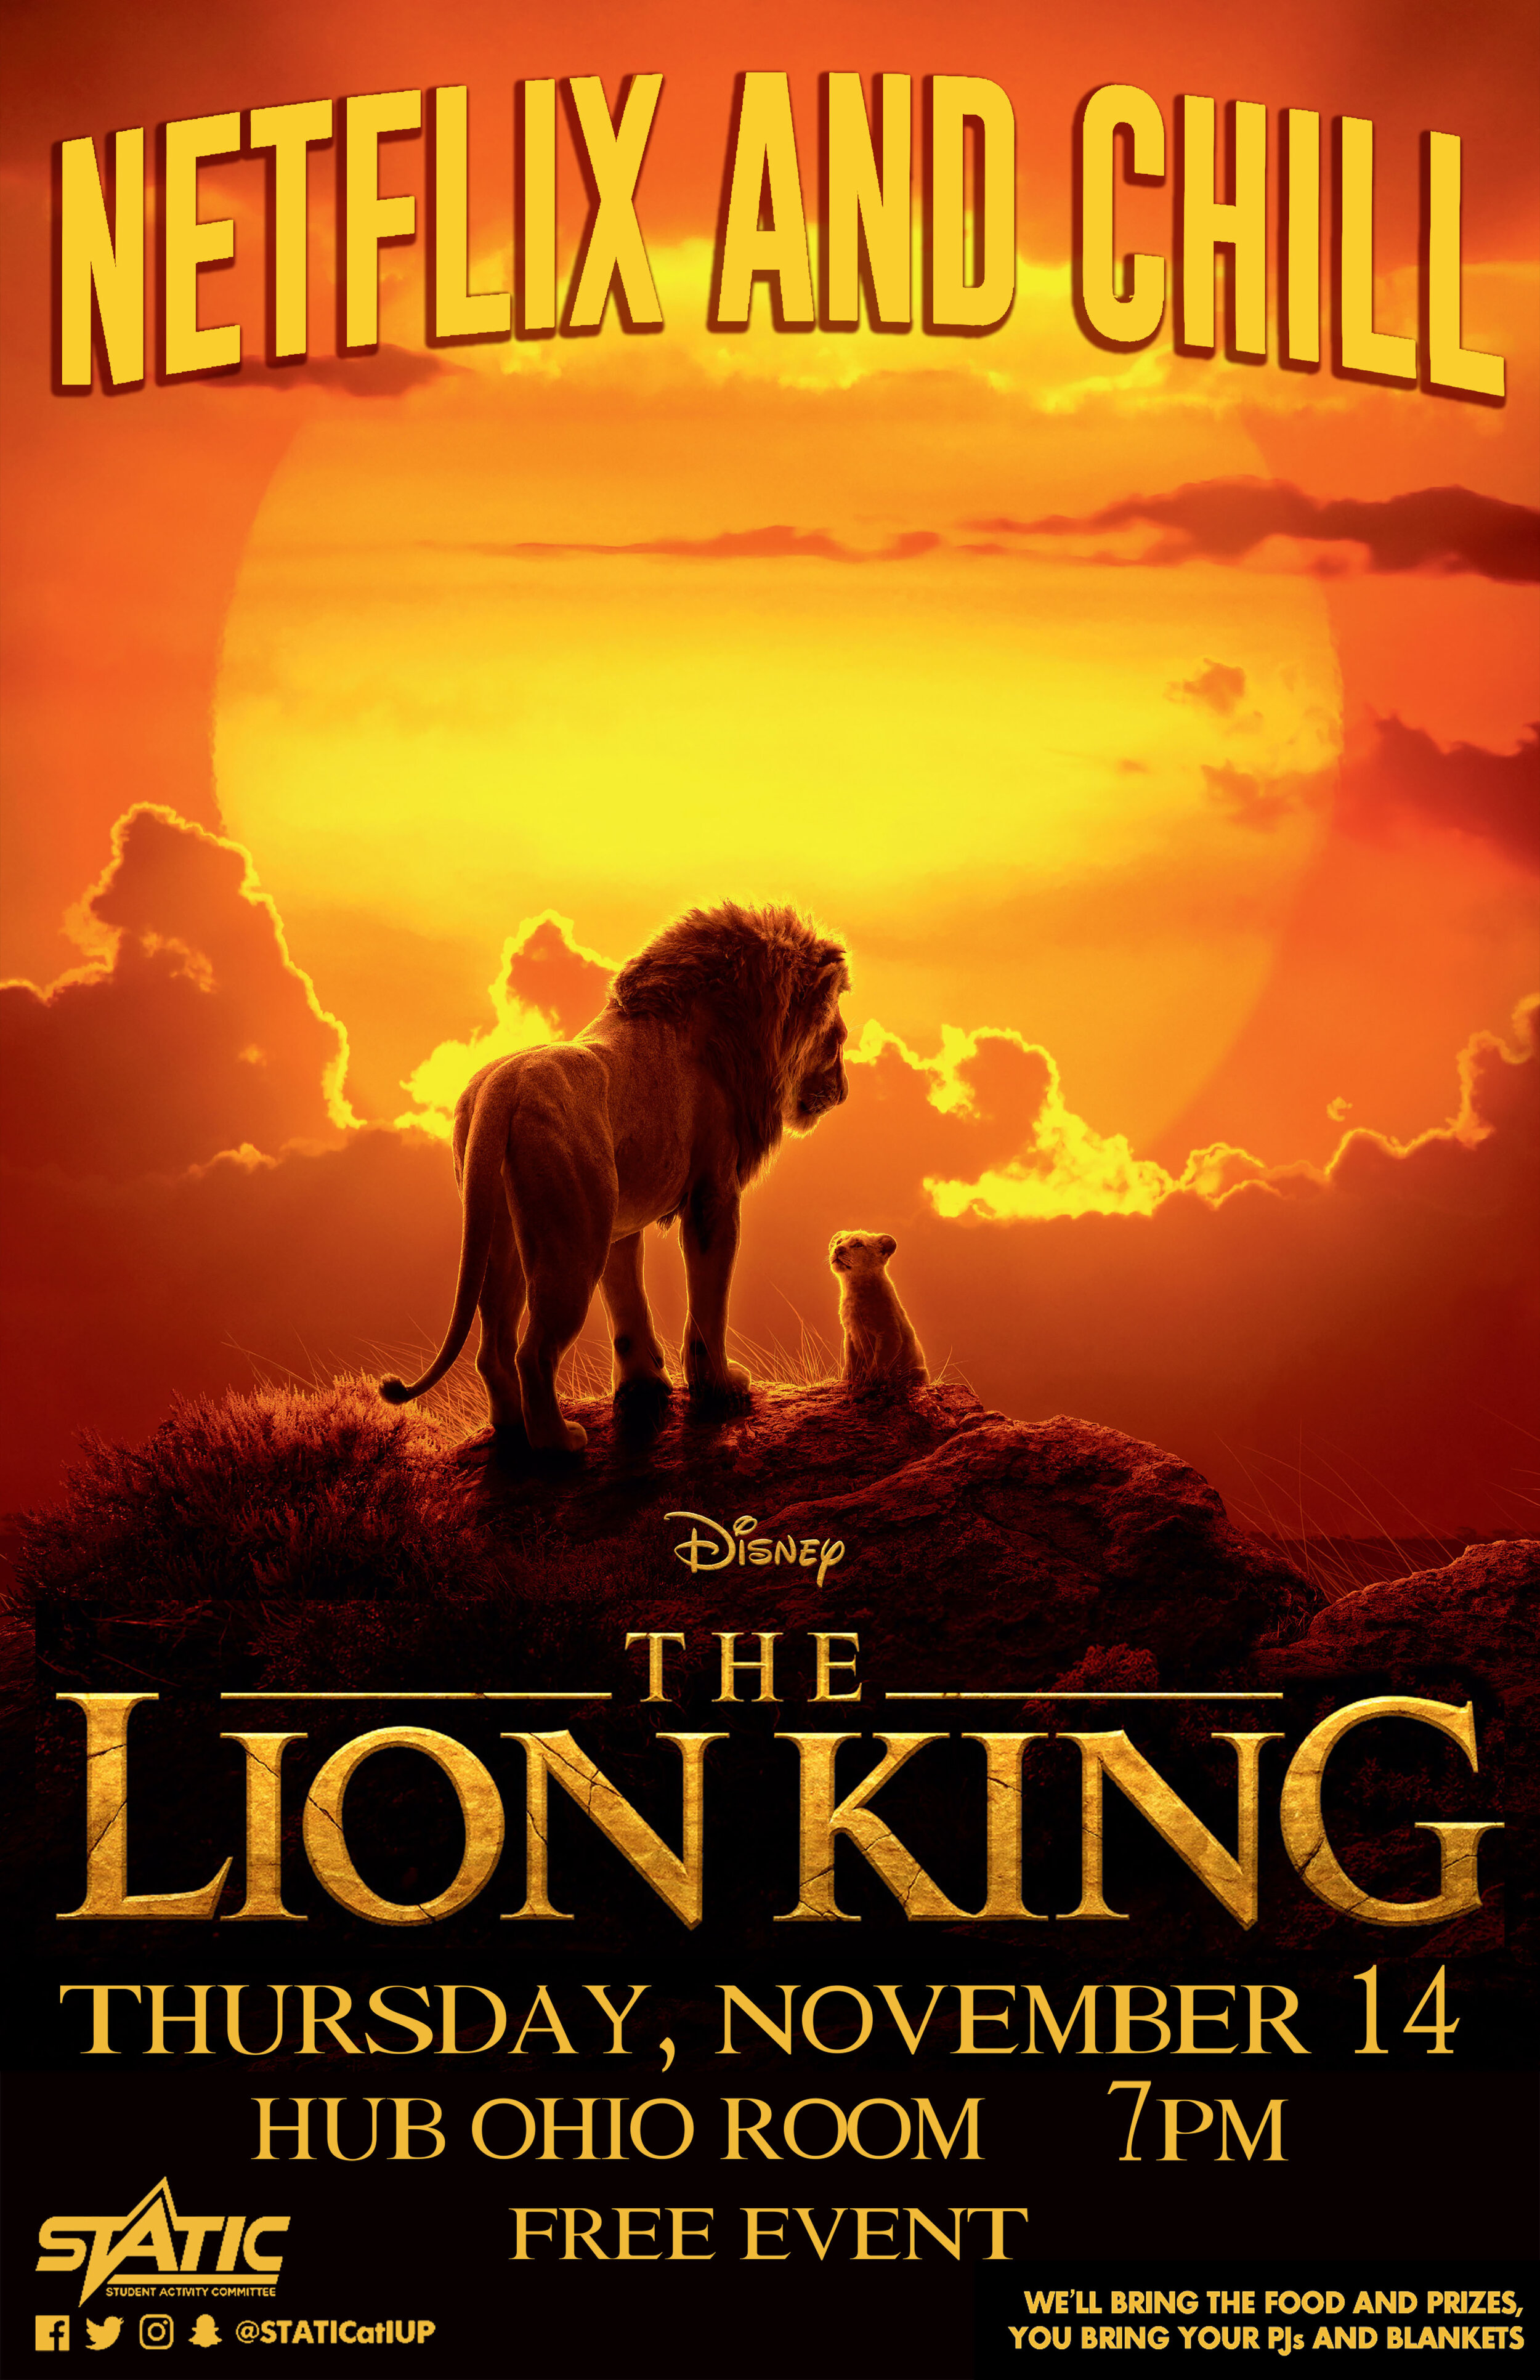 Netflix Chill The Lion King 19 Static At Iup